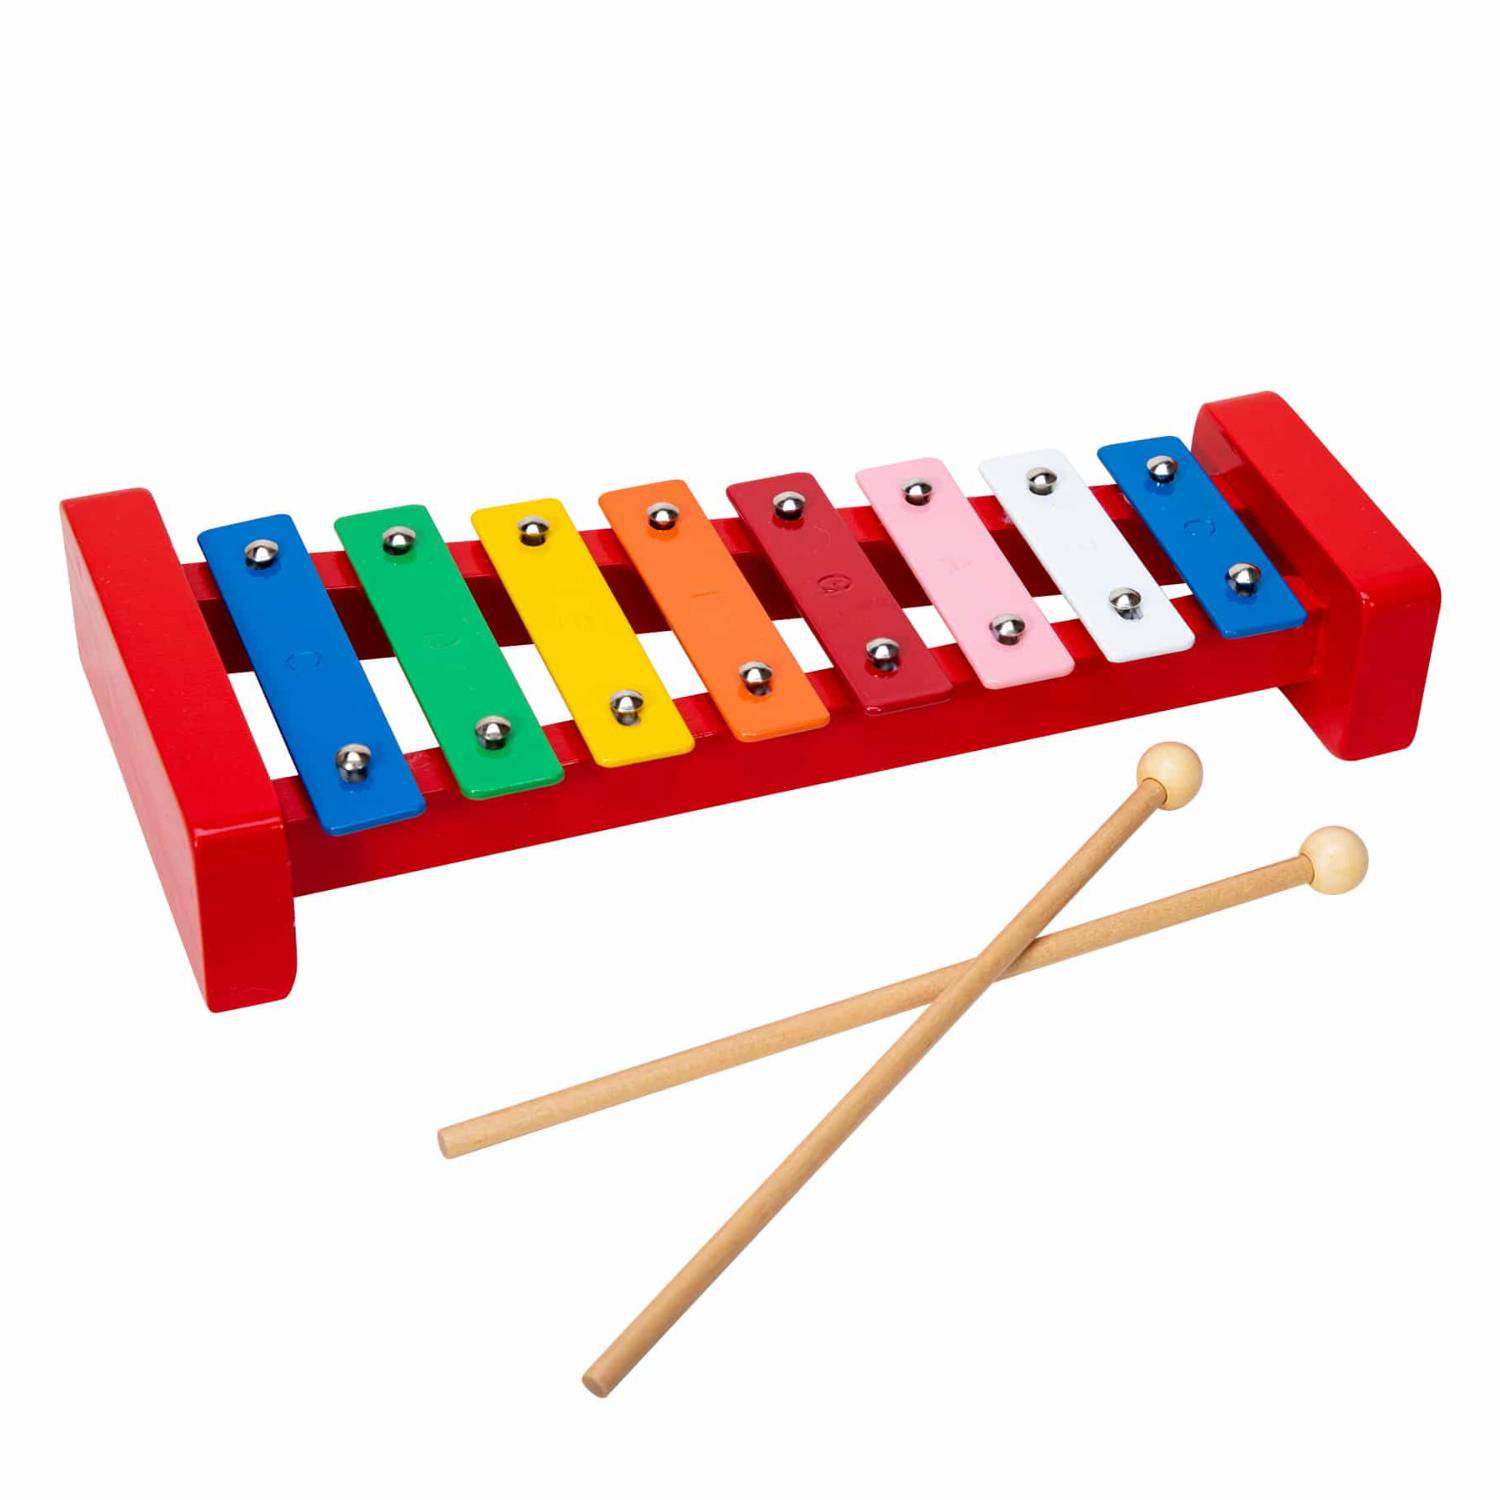 Schylling Wood Xylophone Children's Musical Instrument - image 1 of 3